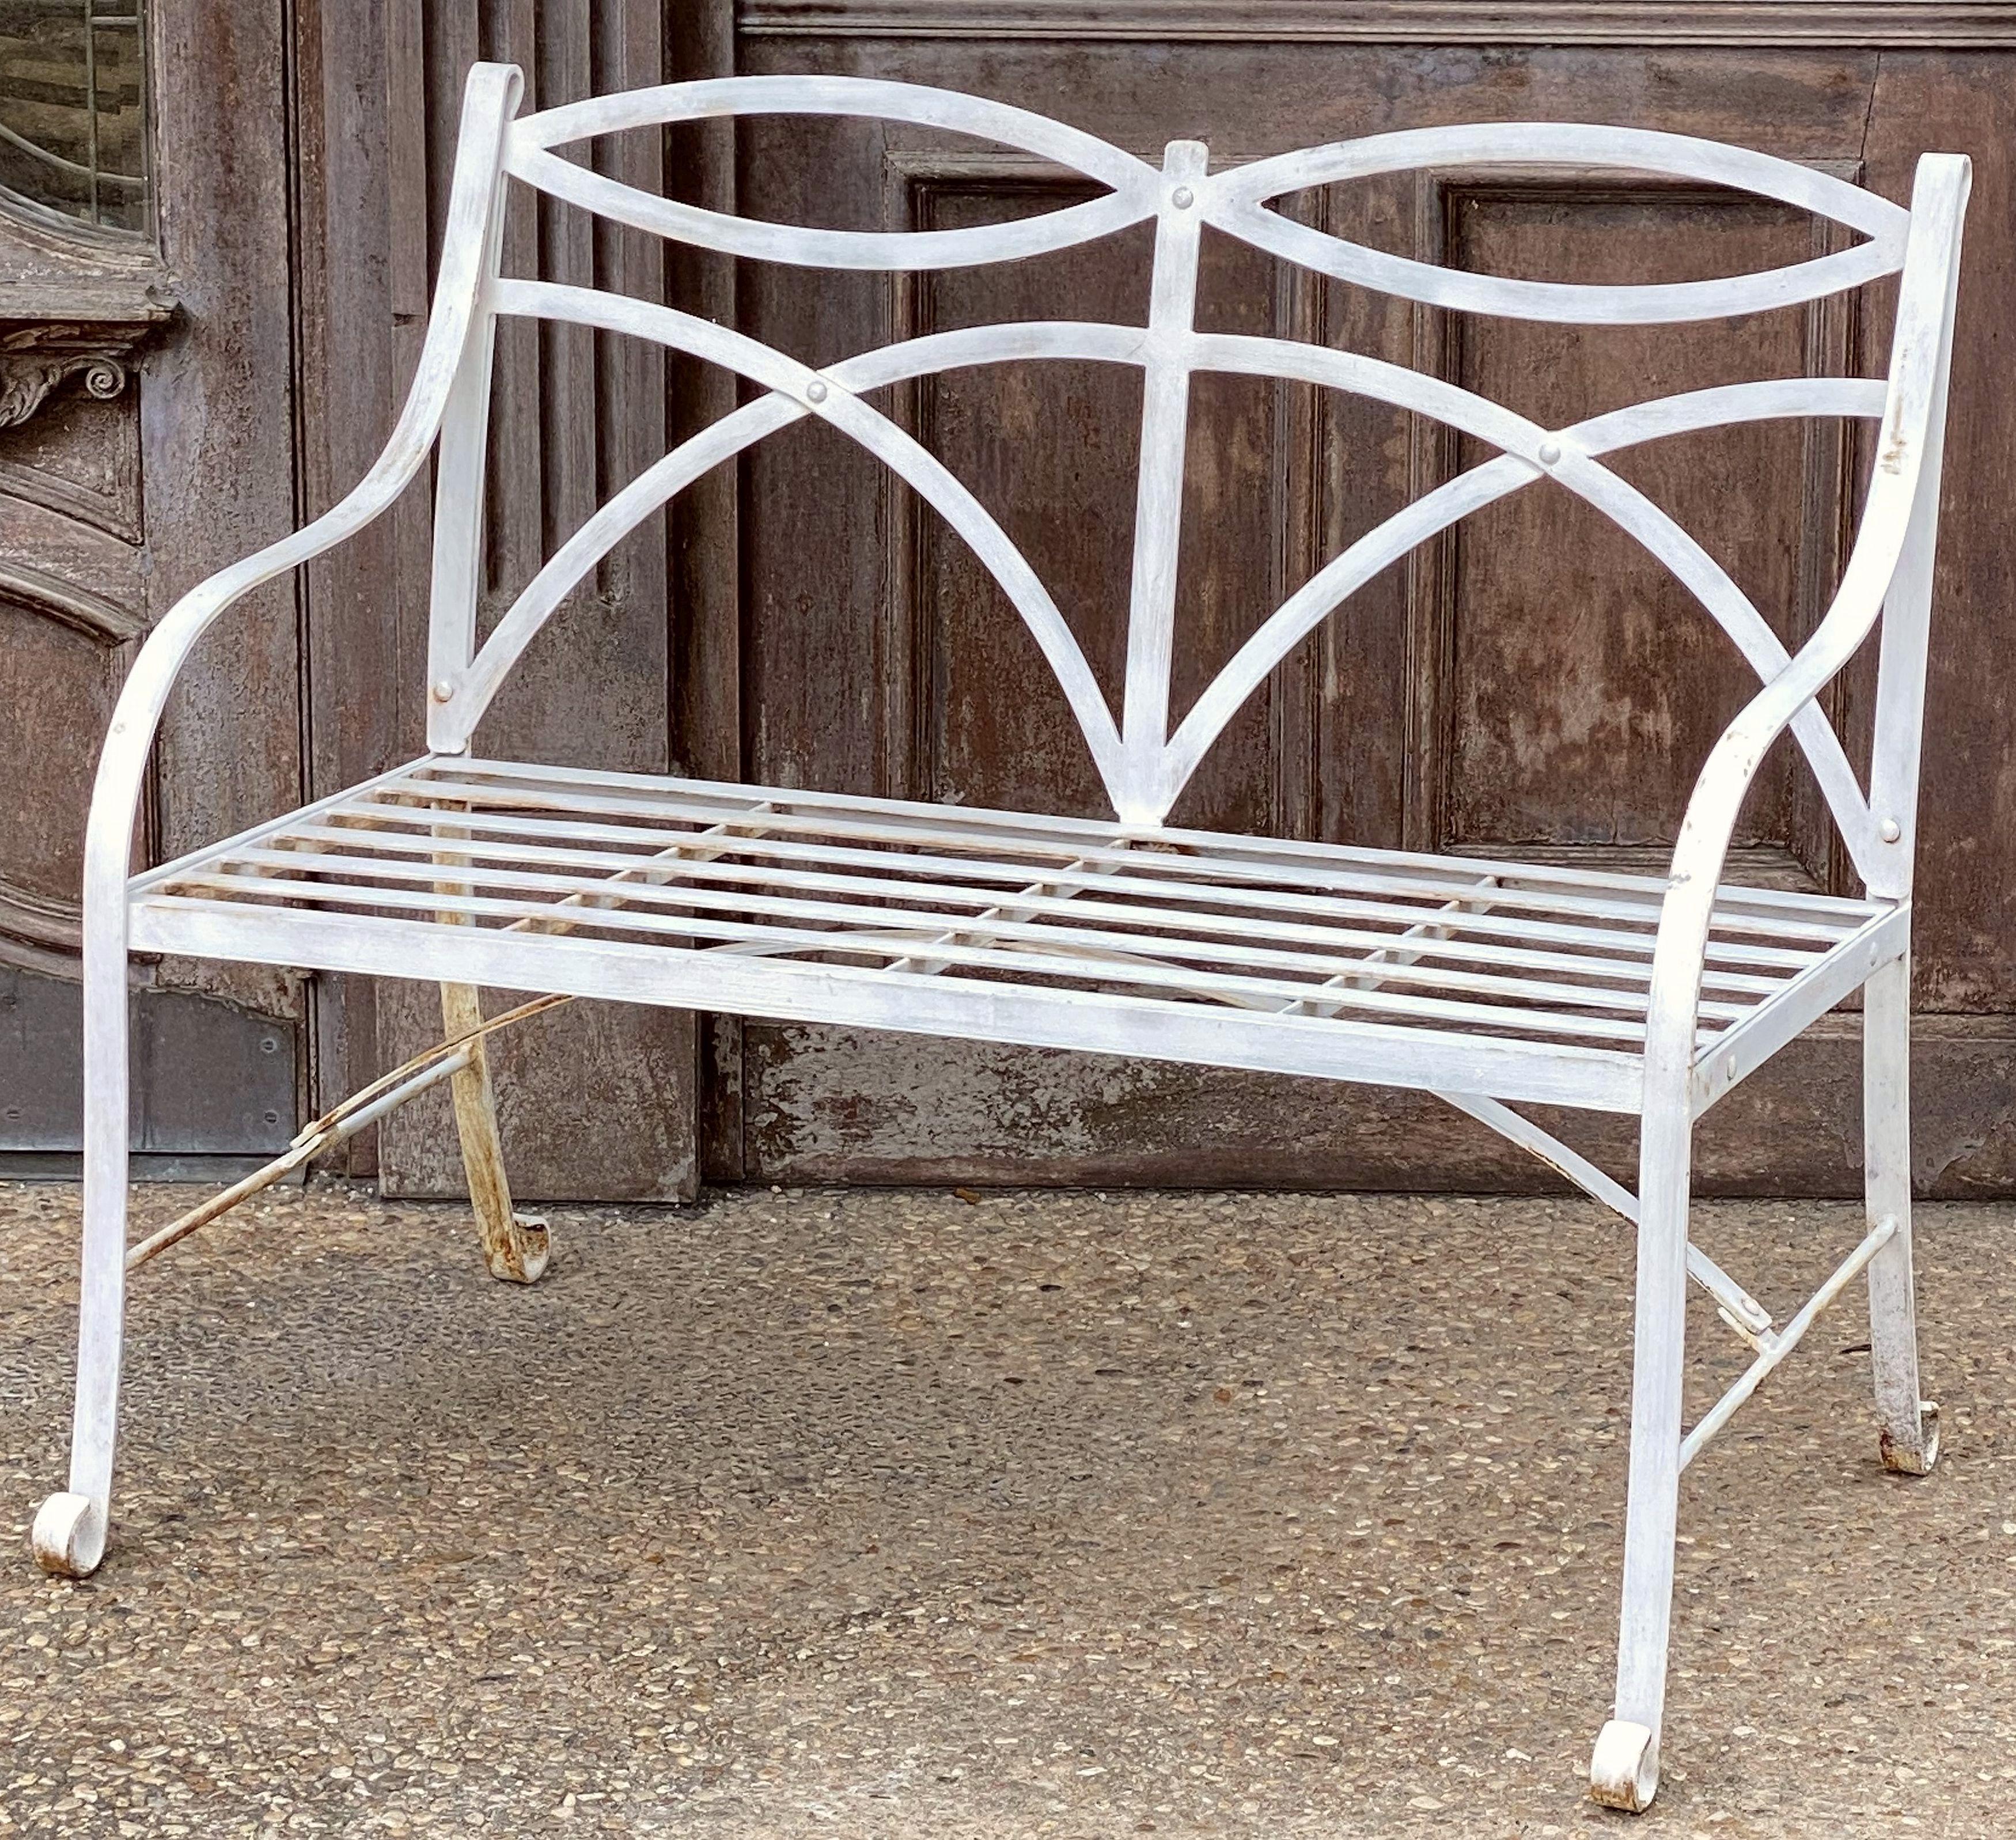 20th Century English Garden Seat or Bench of Painted Metal in the Regency Style